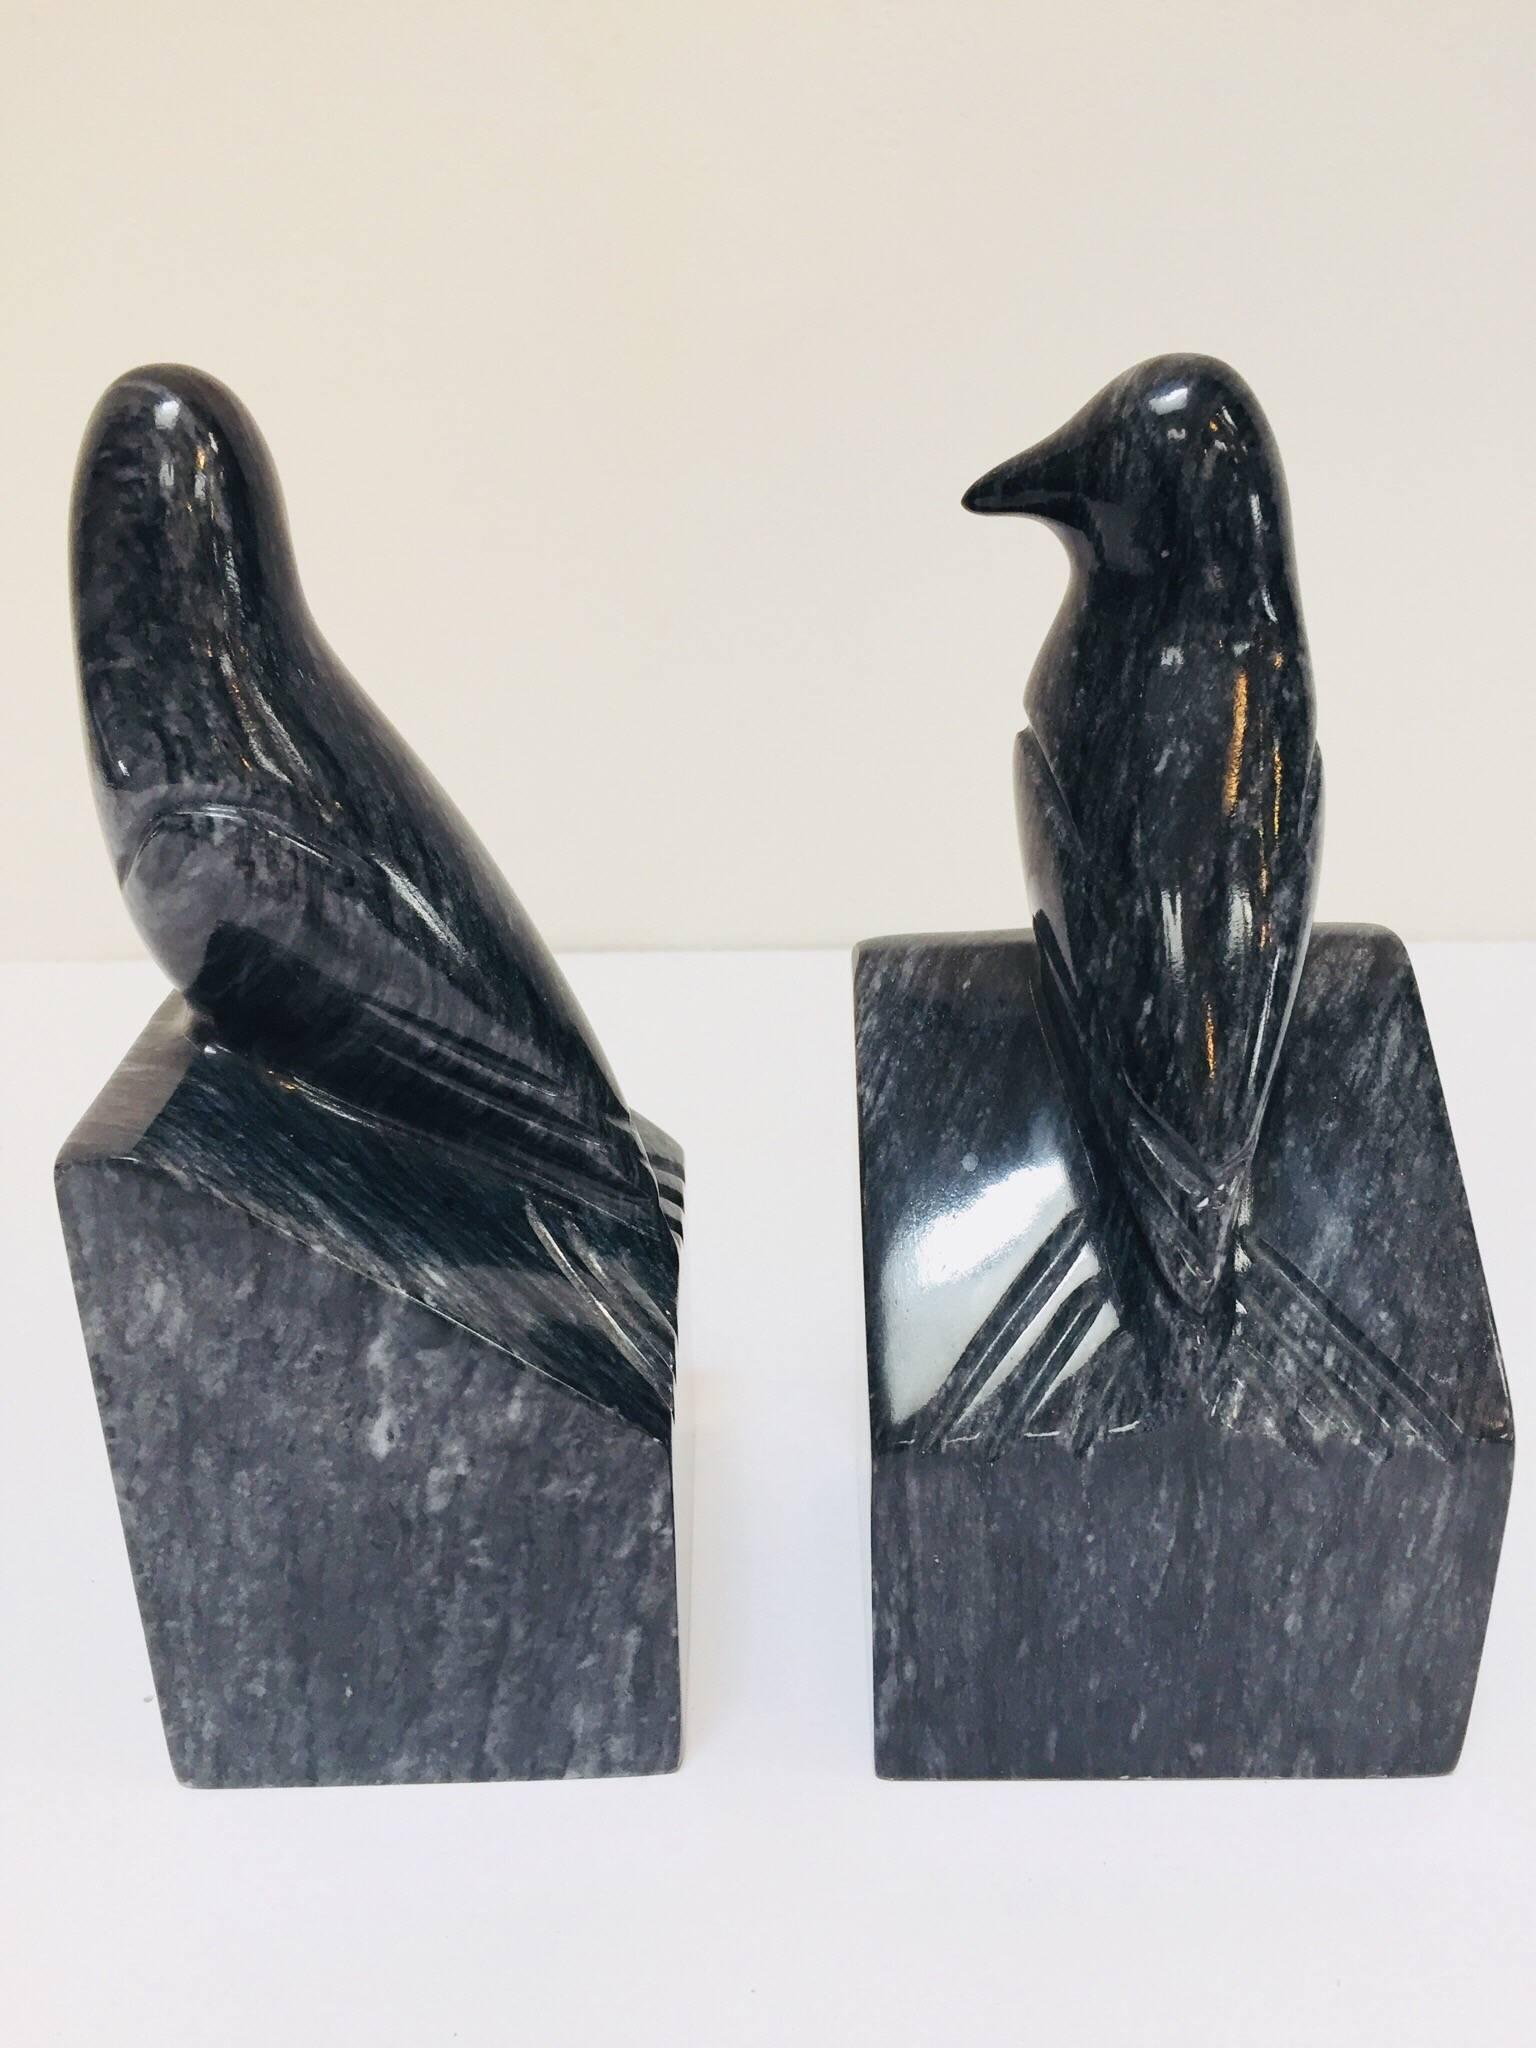 Pair of Modernist Art Deco Black Marble Birds Bookends 1